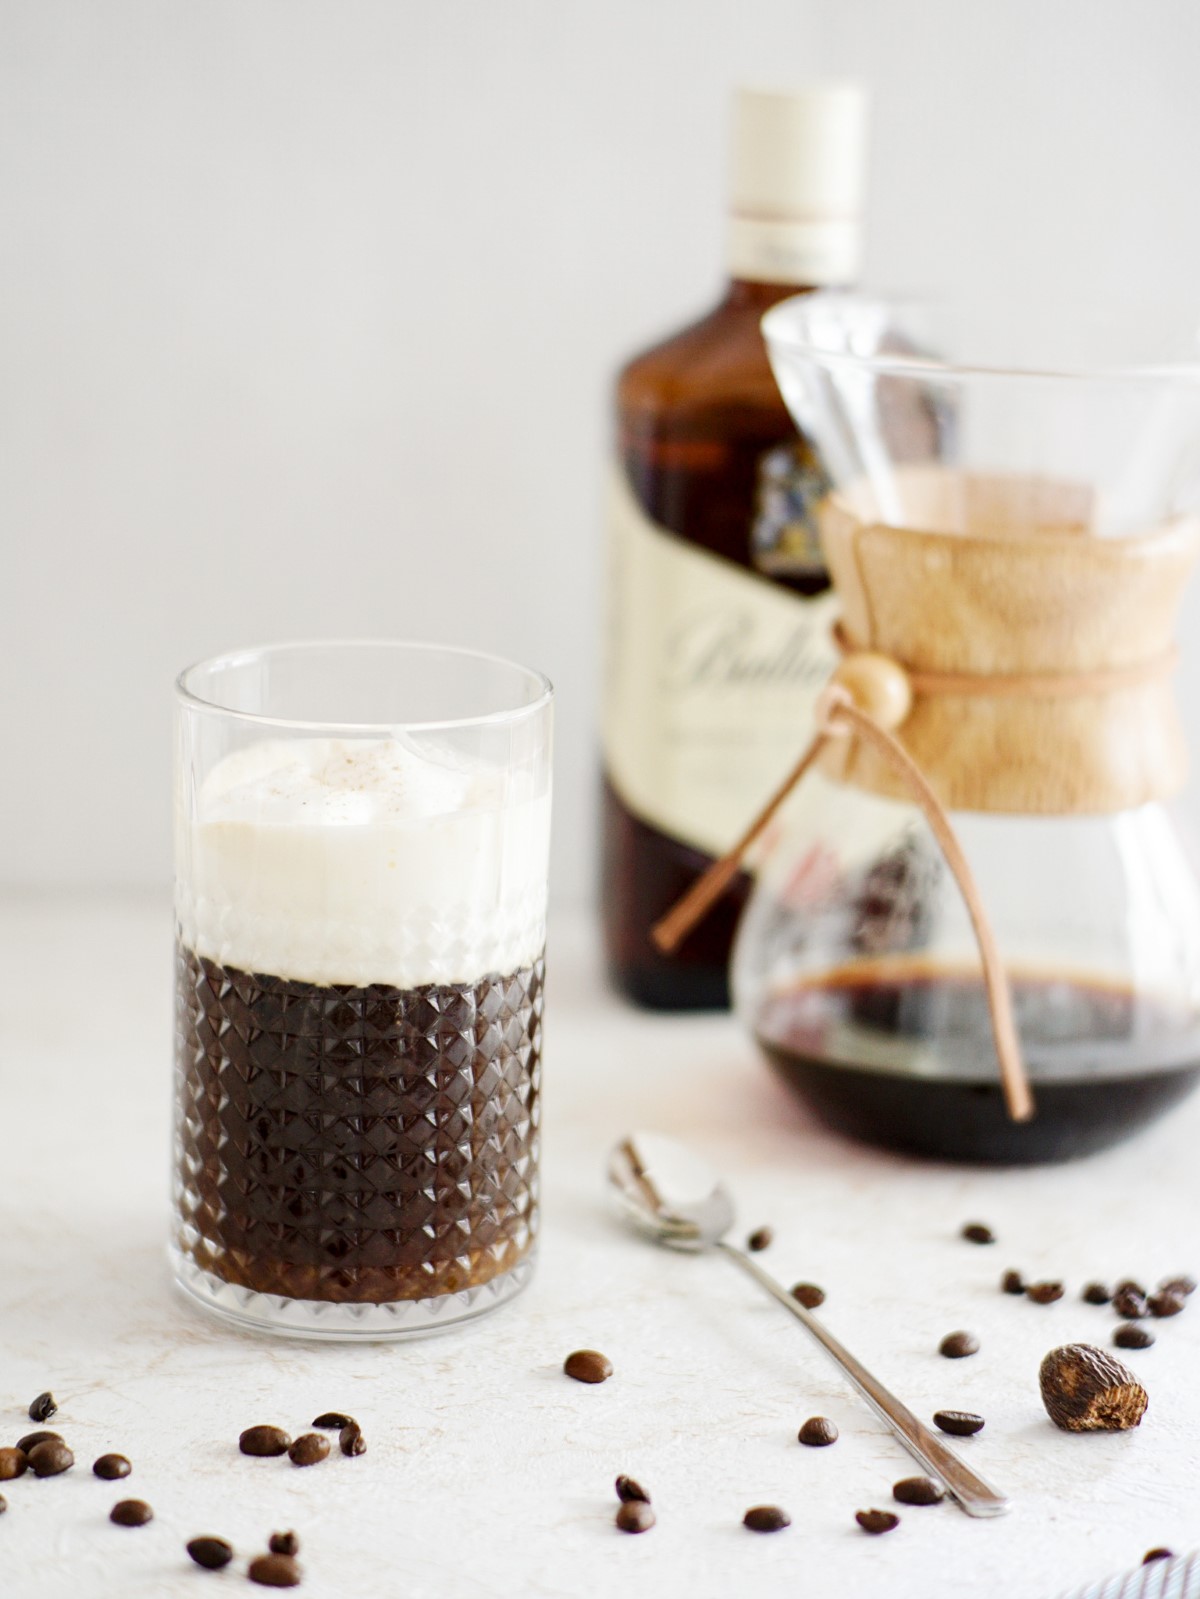 Irish Coffee with Whipped Cream - Title of the Recipe